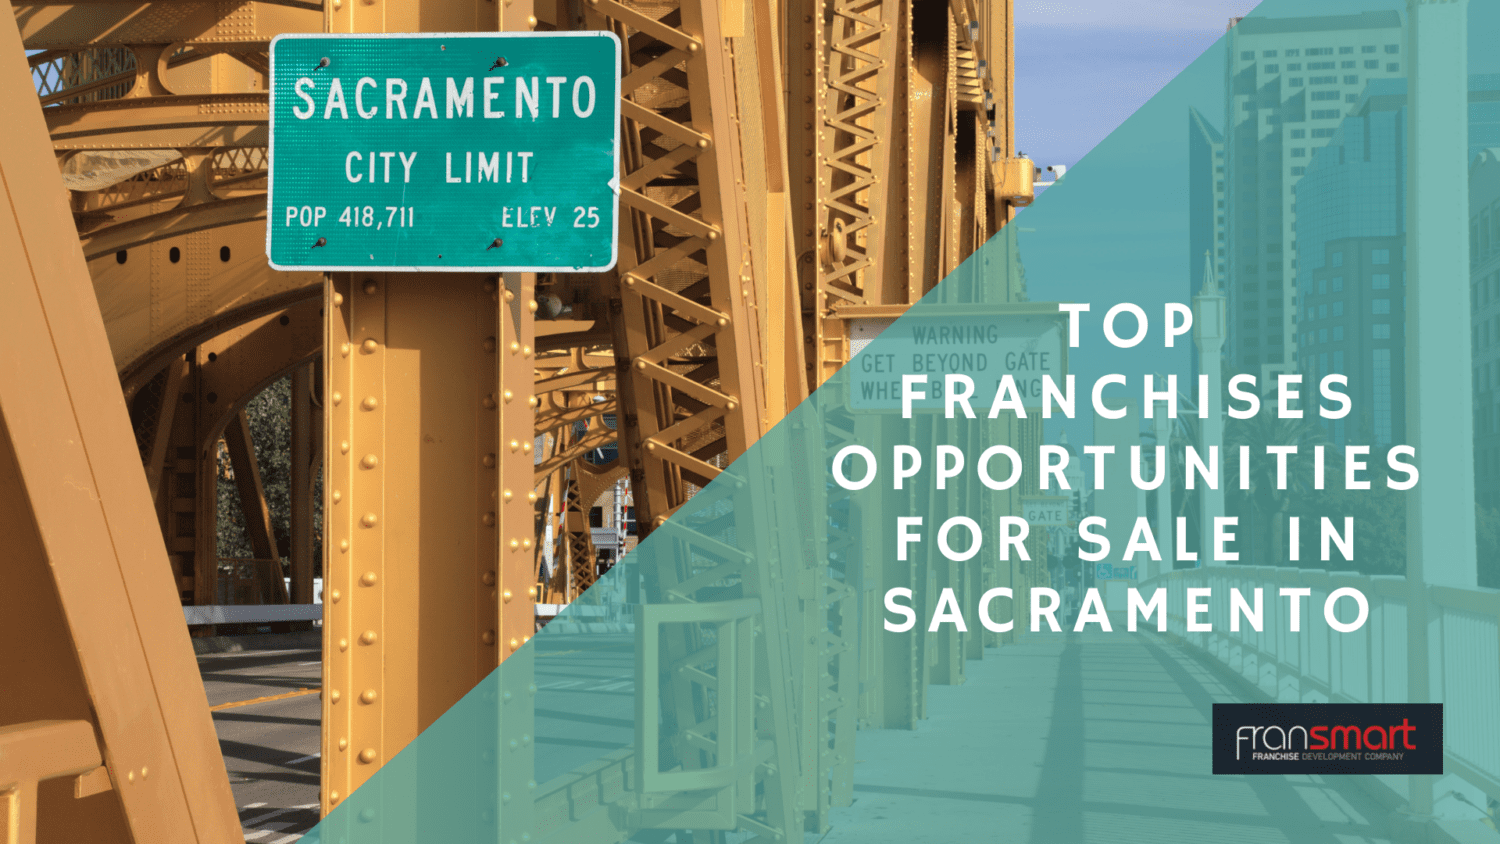 Top 5 Franchises Opportunities for Sale in Sacramento